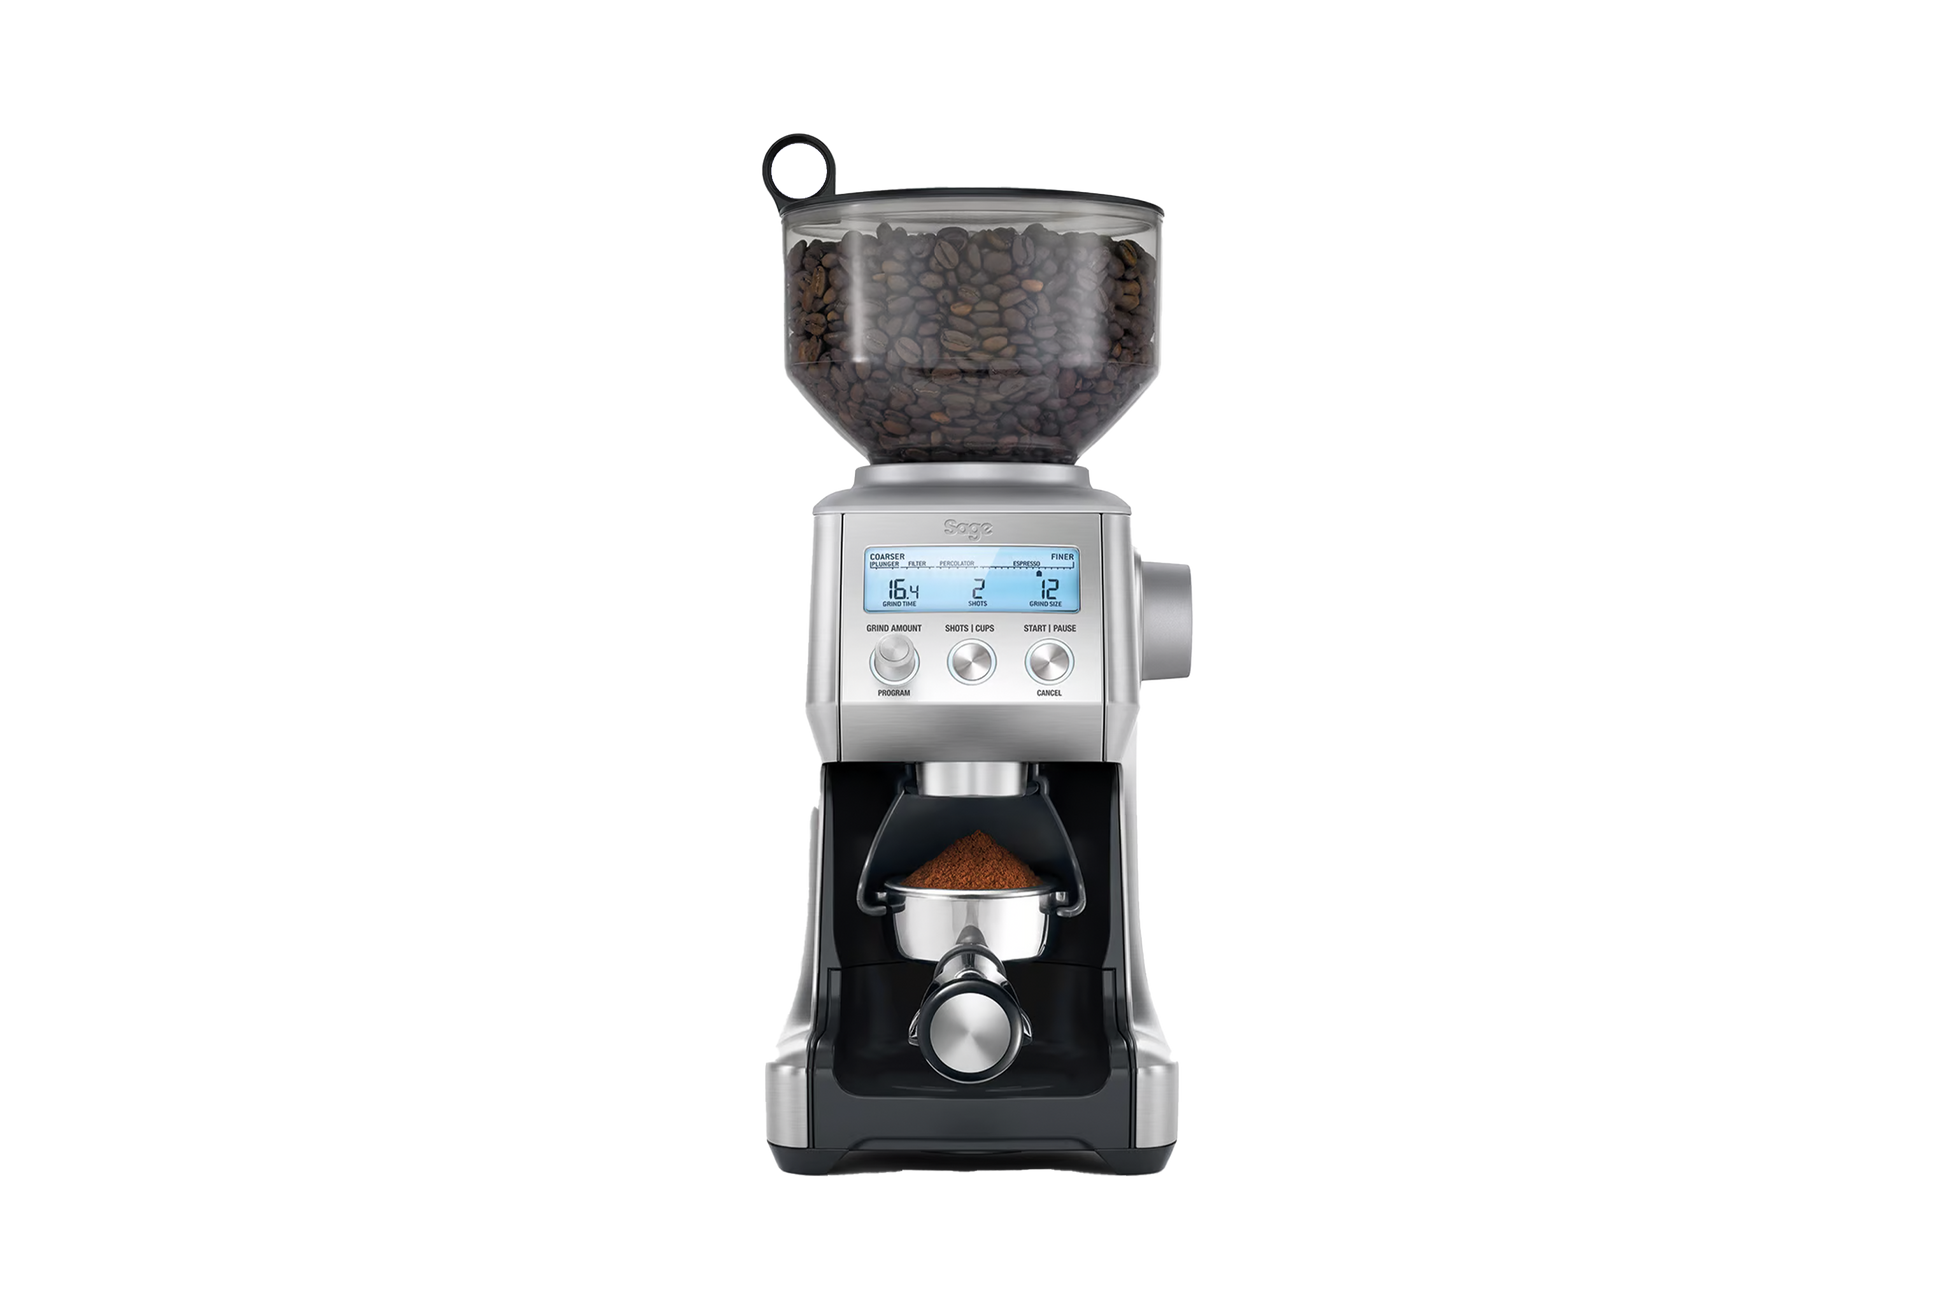 With 60 unique settings, the Smart Pro grinder is perfect for all coffee brewing methods, from espresso to filter.